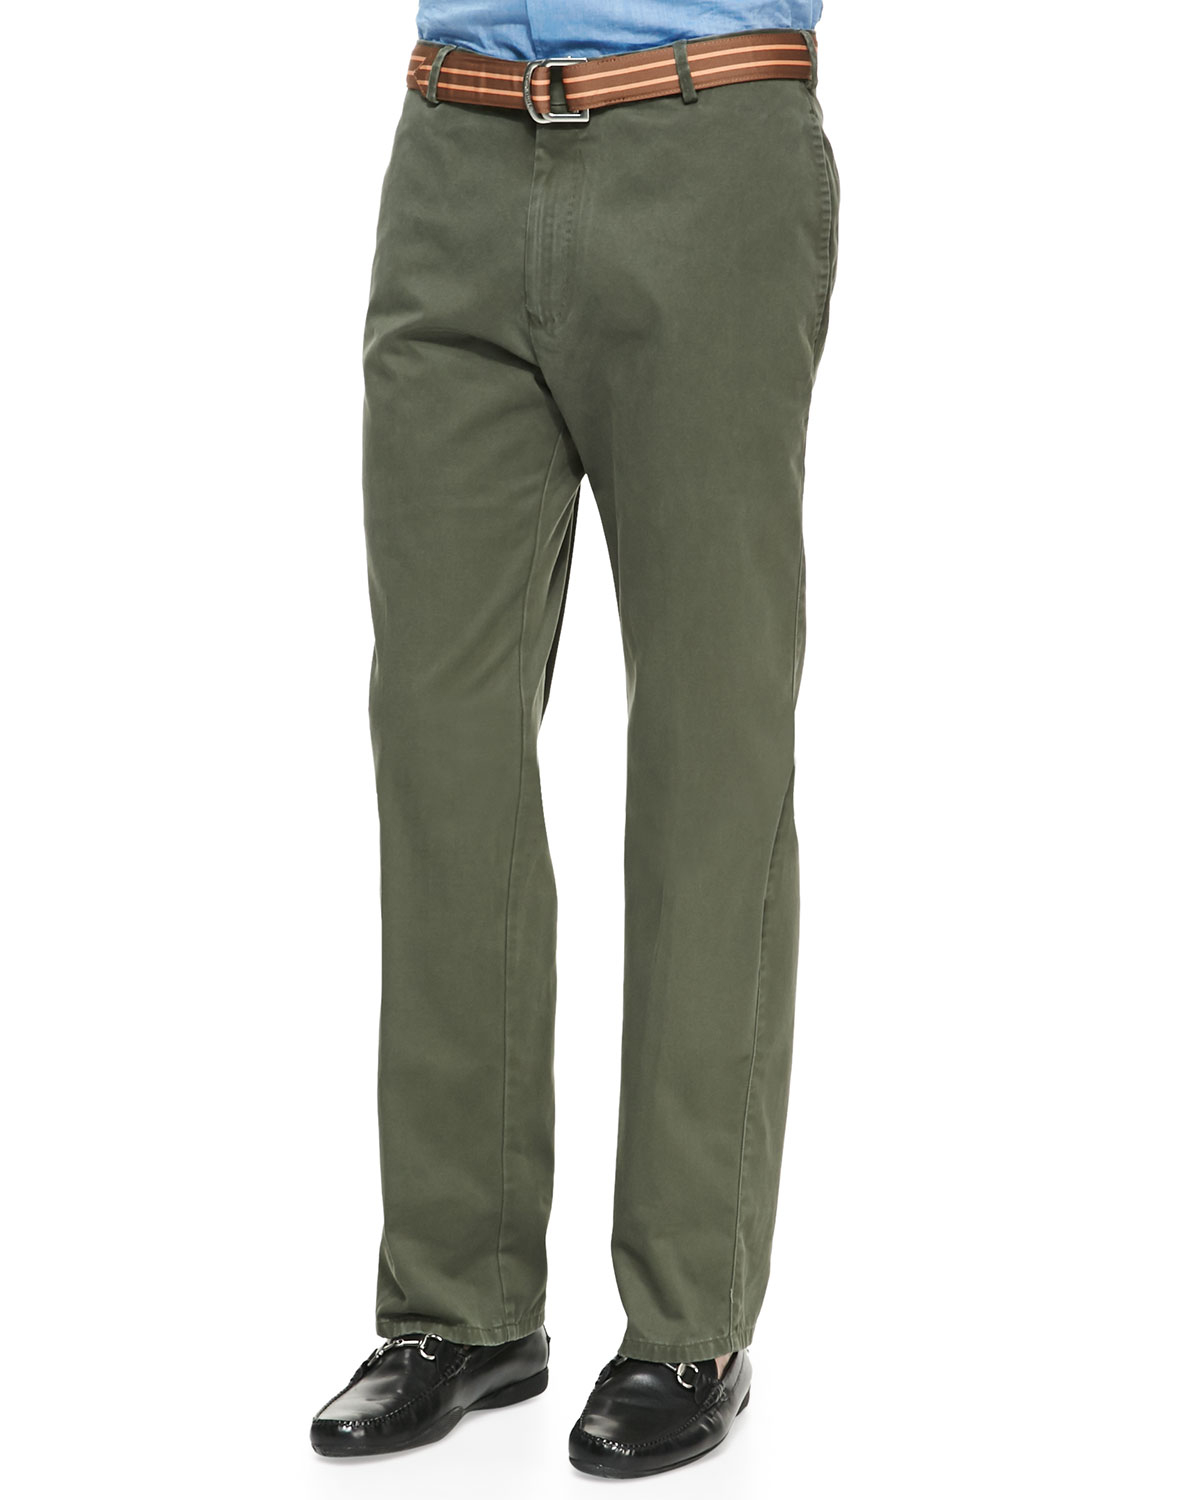 Lyst - Peter Millar Raleigh Washed-Twill Pants in Green